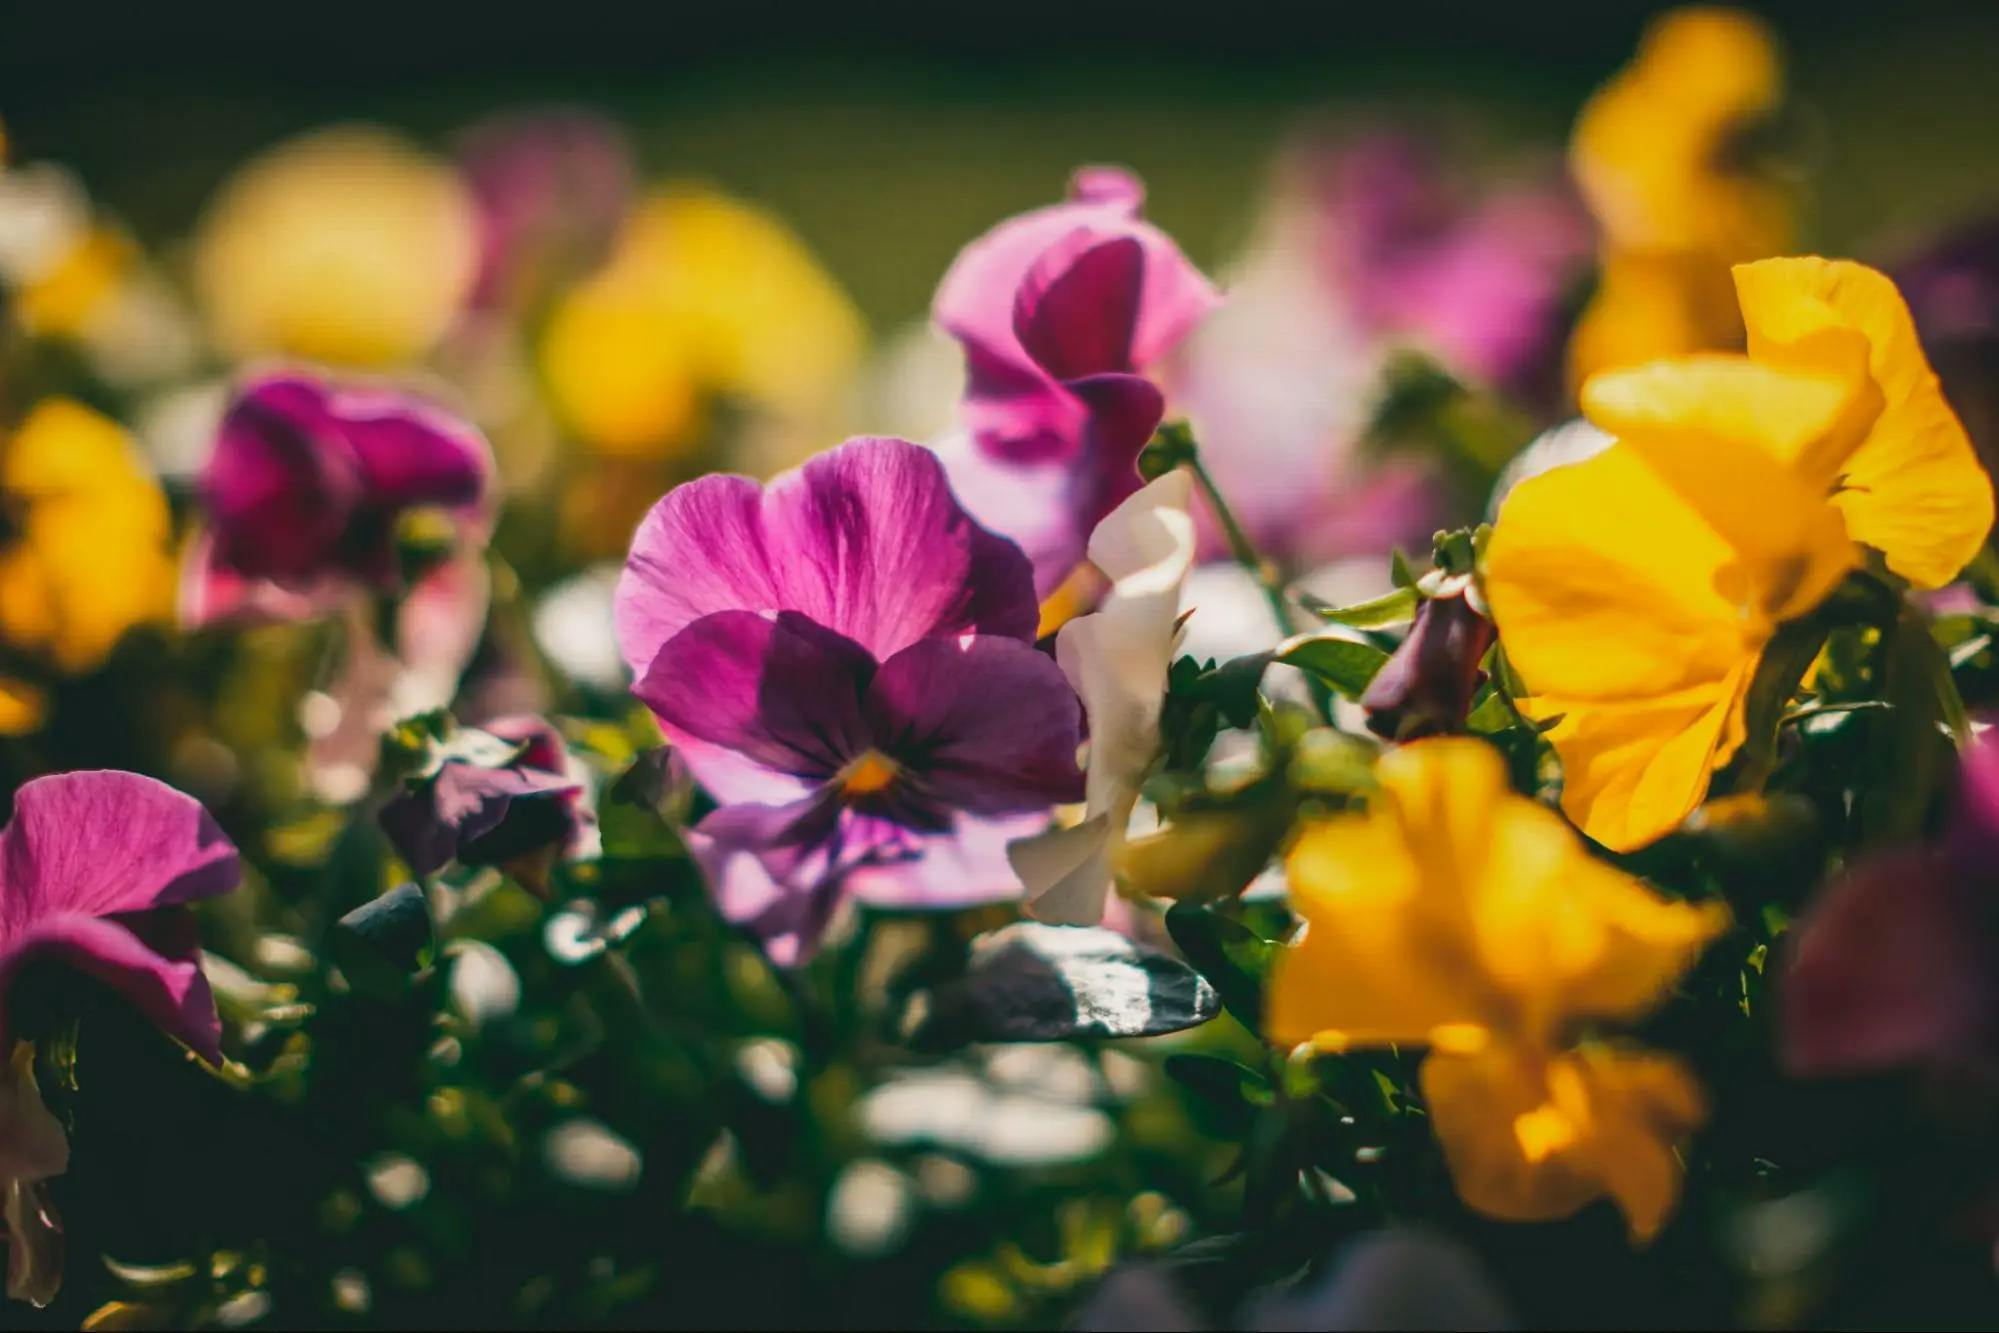 Pansies are the flowers that people usually leave at the graves on All Saints Day. Photo by Raimond Klavins, Unsplash